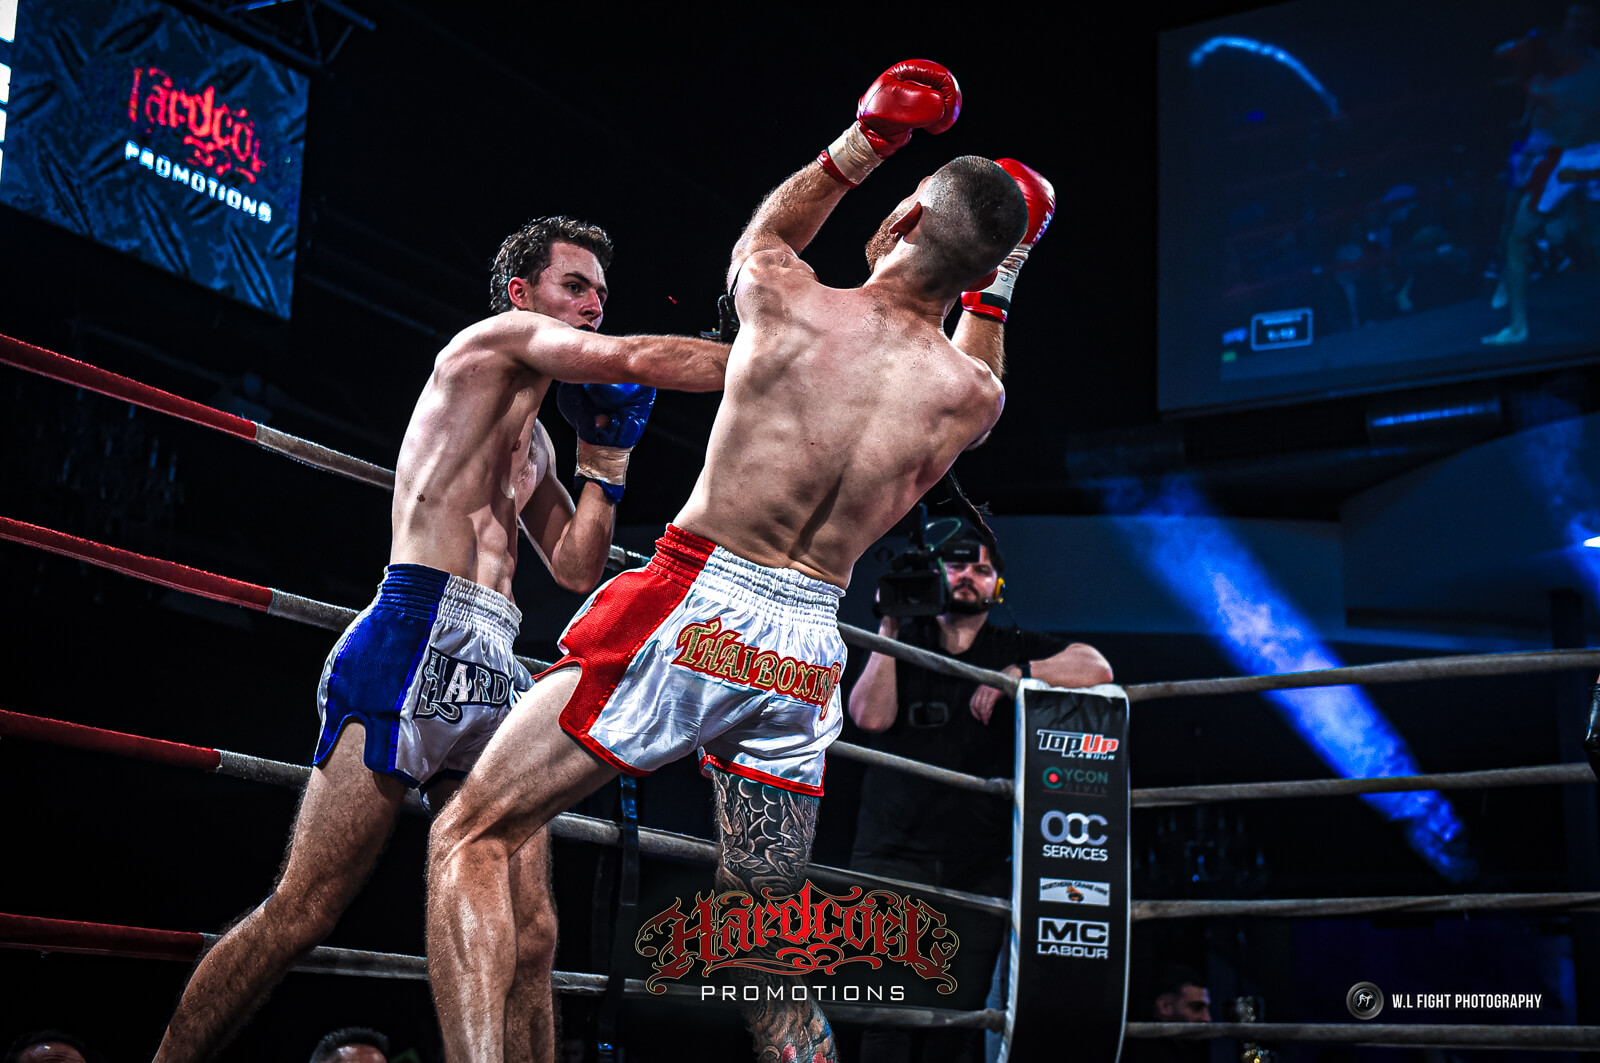 Concussion in Muay Thai Prioritizing Fighter Safety Above All